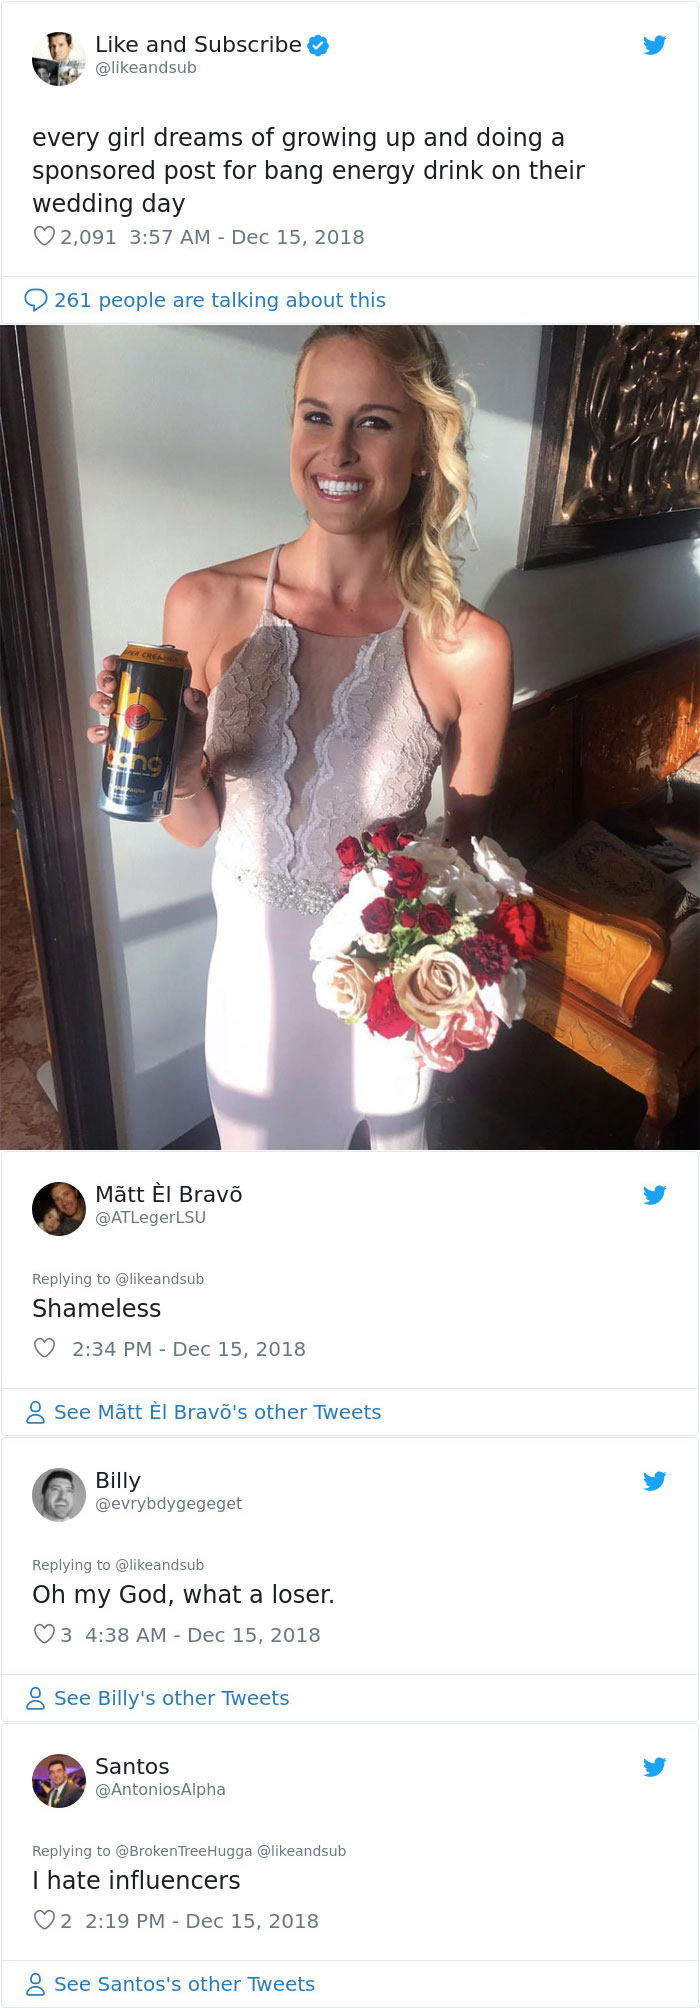 Every Girl Dreams Of Growing Up And Doing A Sponsored Post For Bang Energy Drink On Their Wedding Day